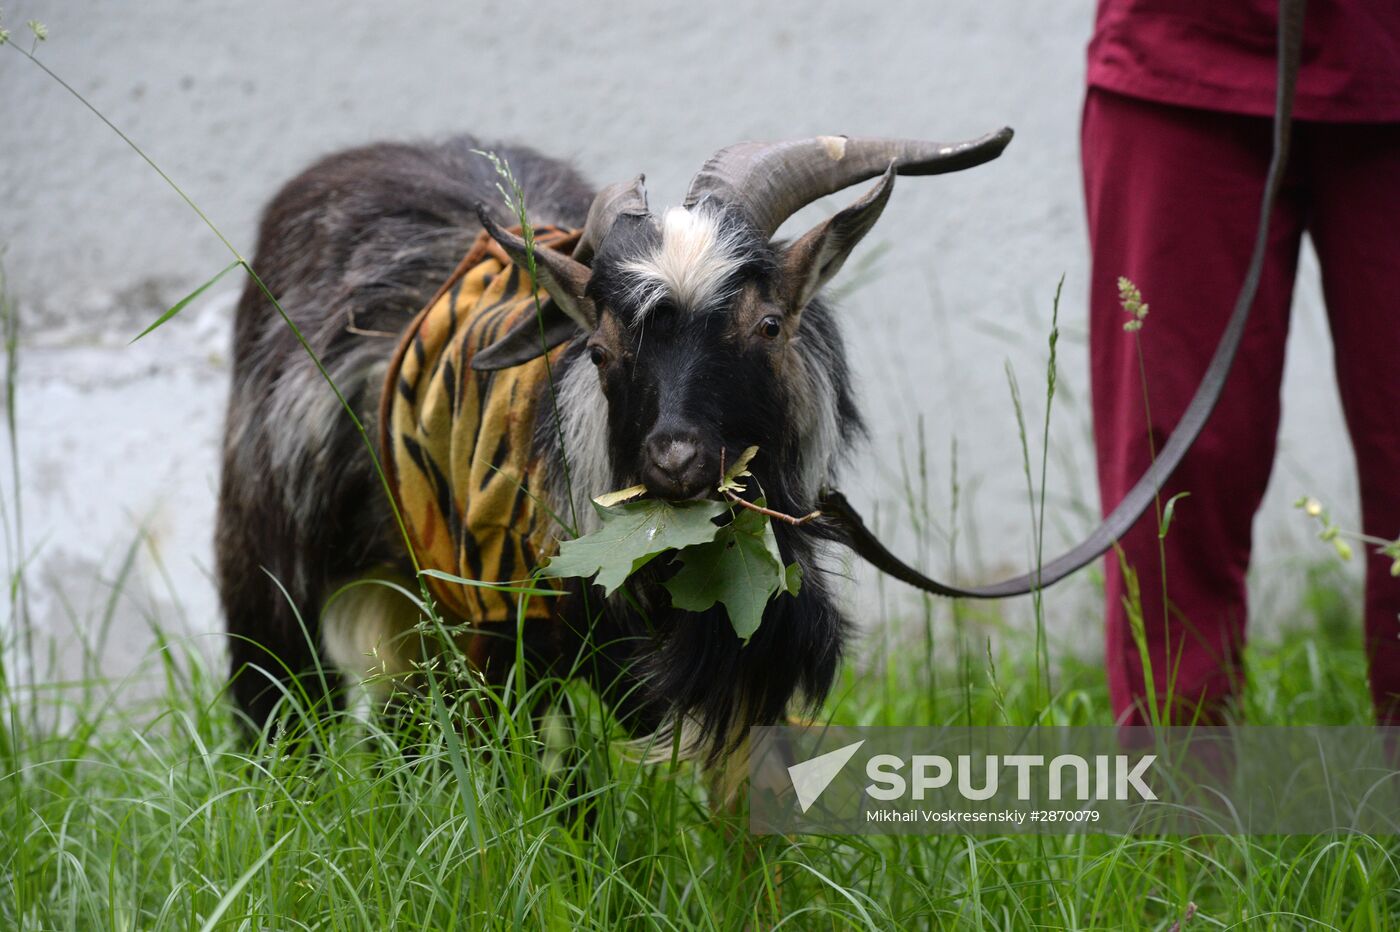 Timur the goat is being treated in Moscow